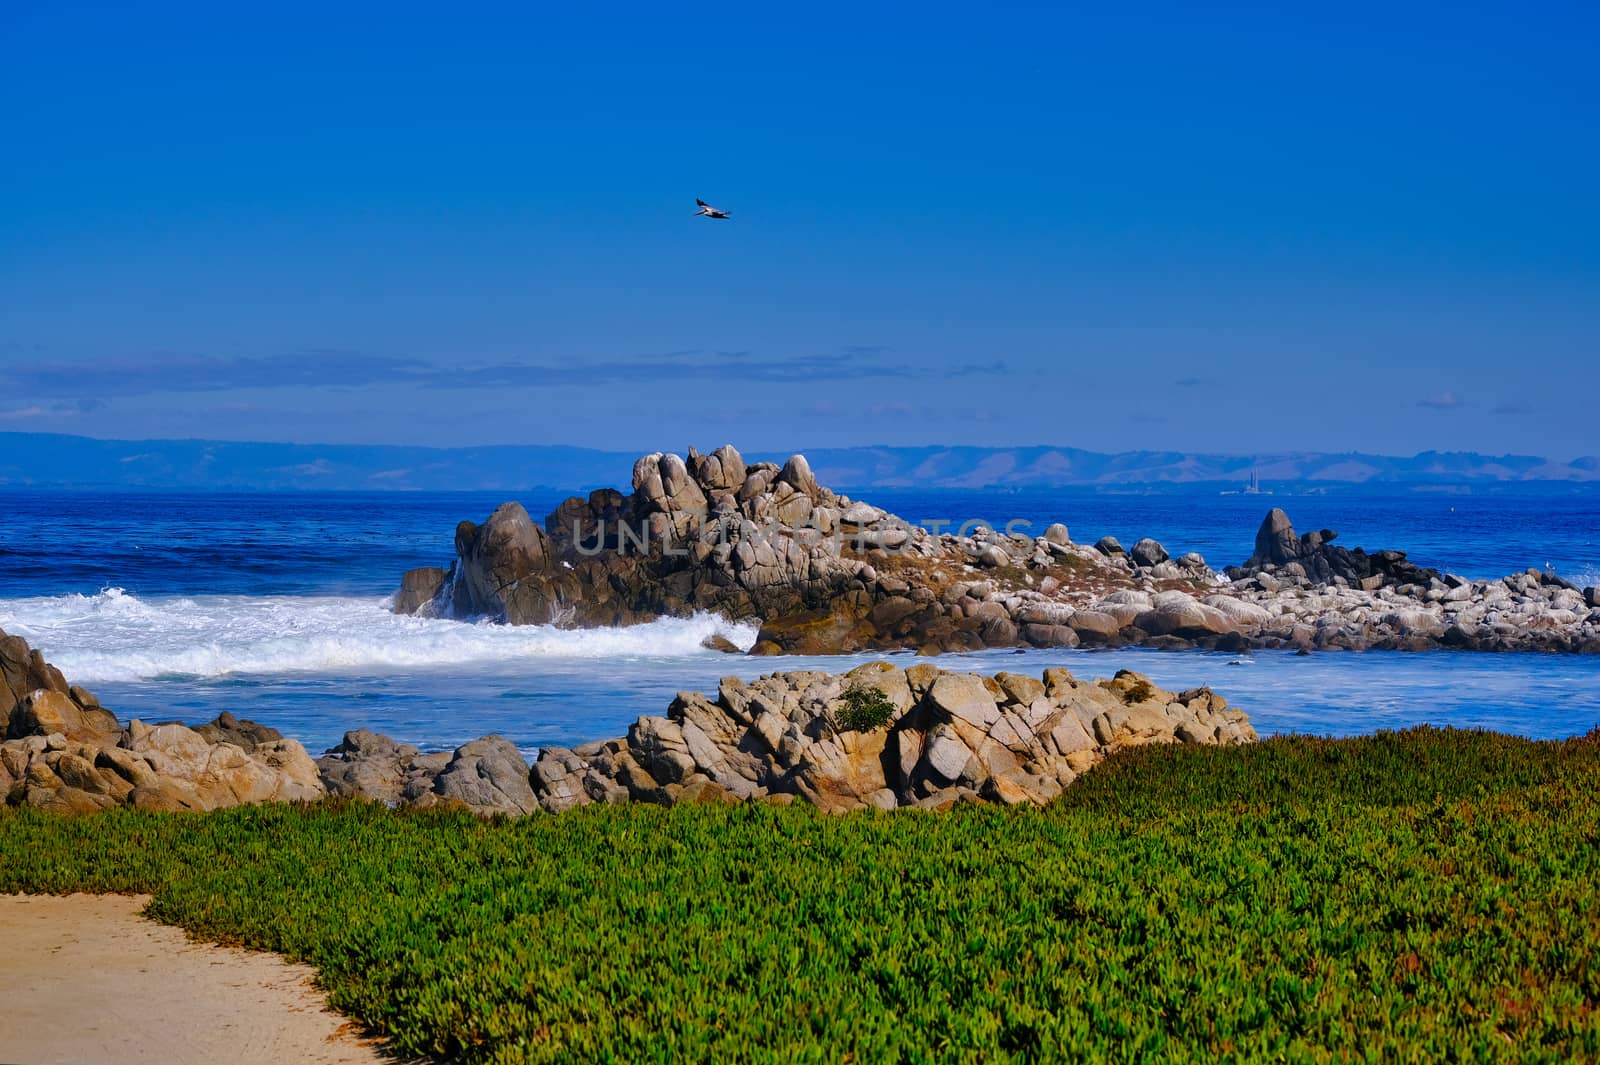 Green Ground Cover on Pacific Grove Beach by dbvirago